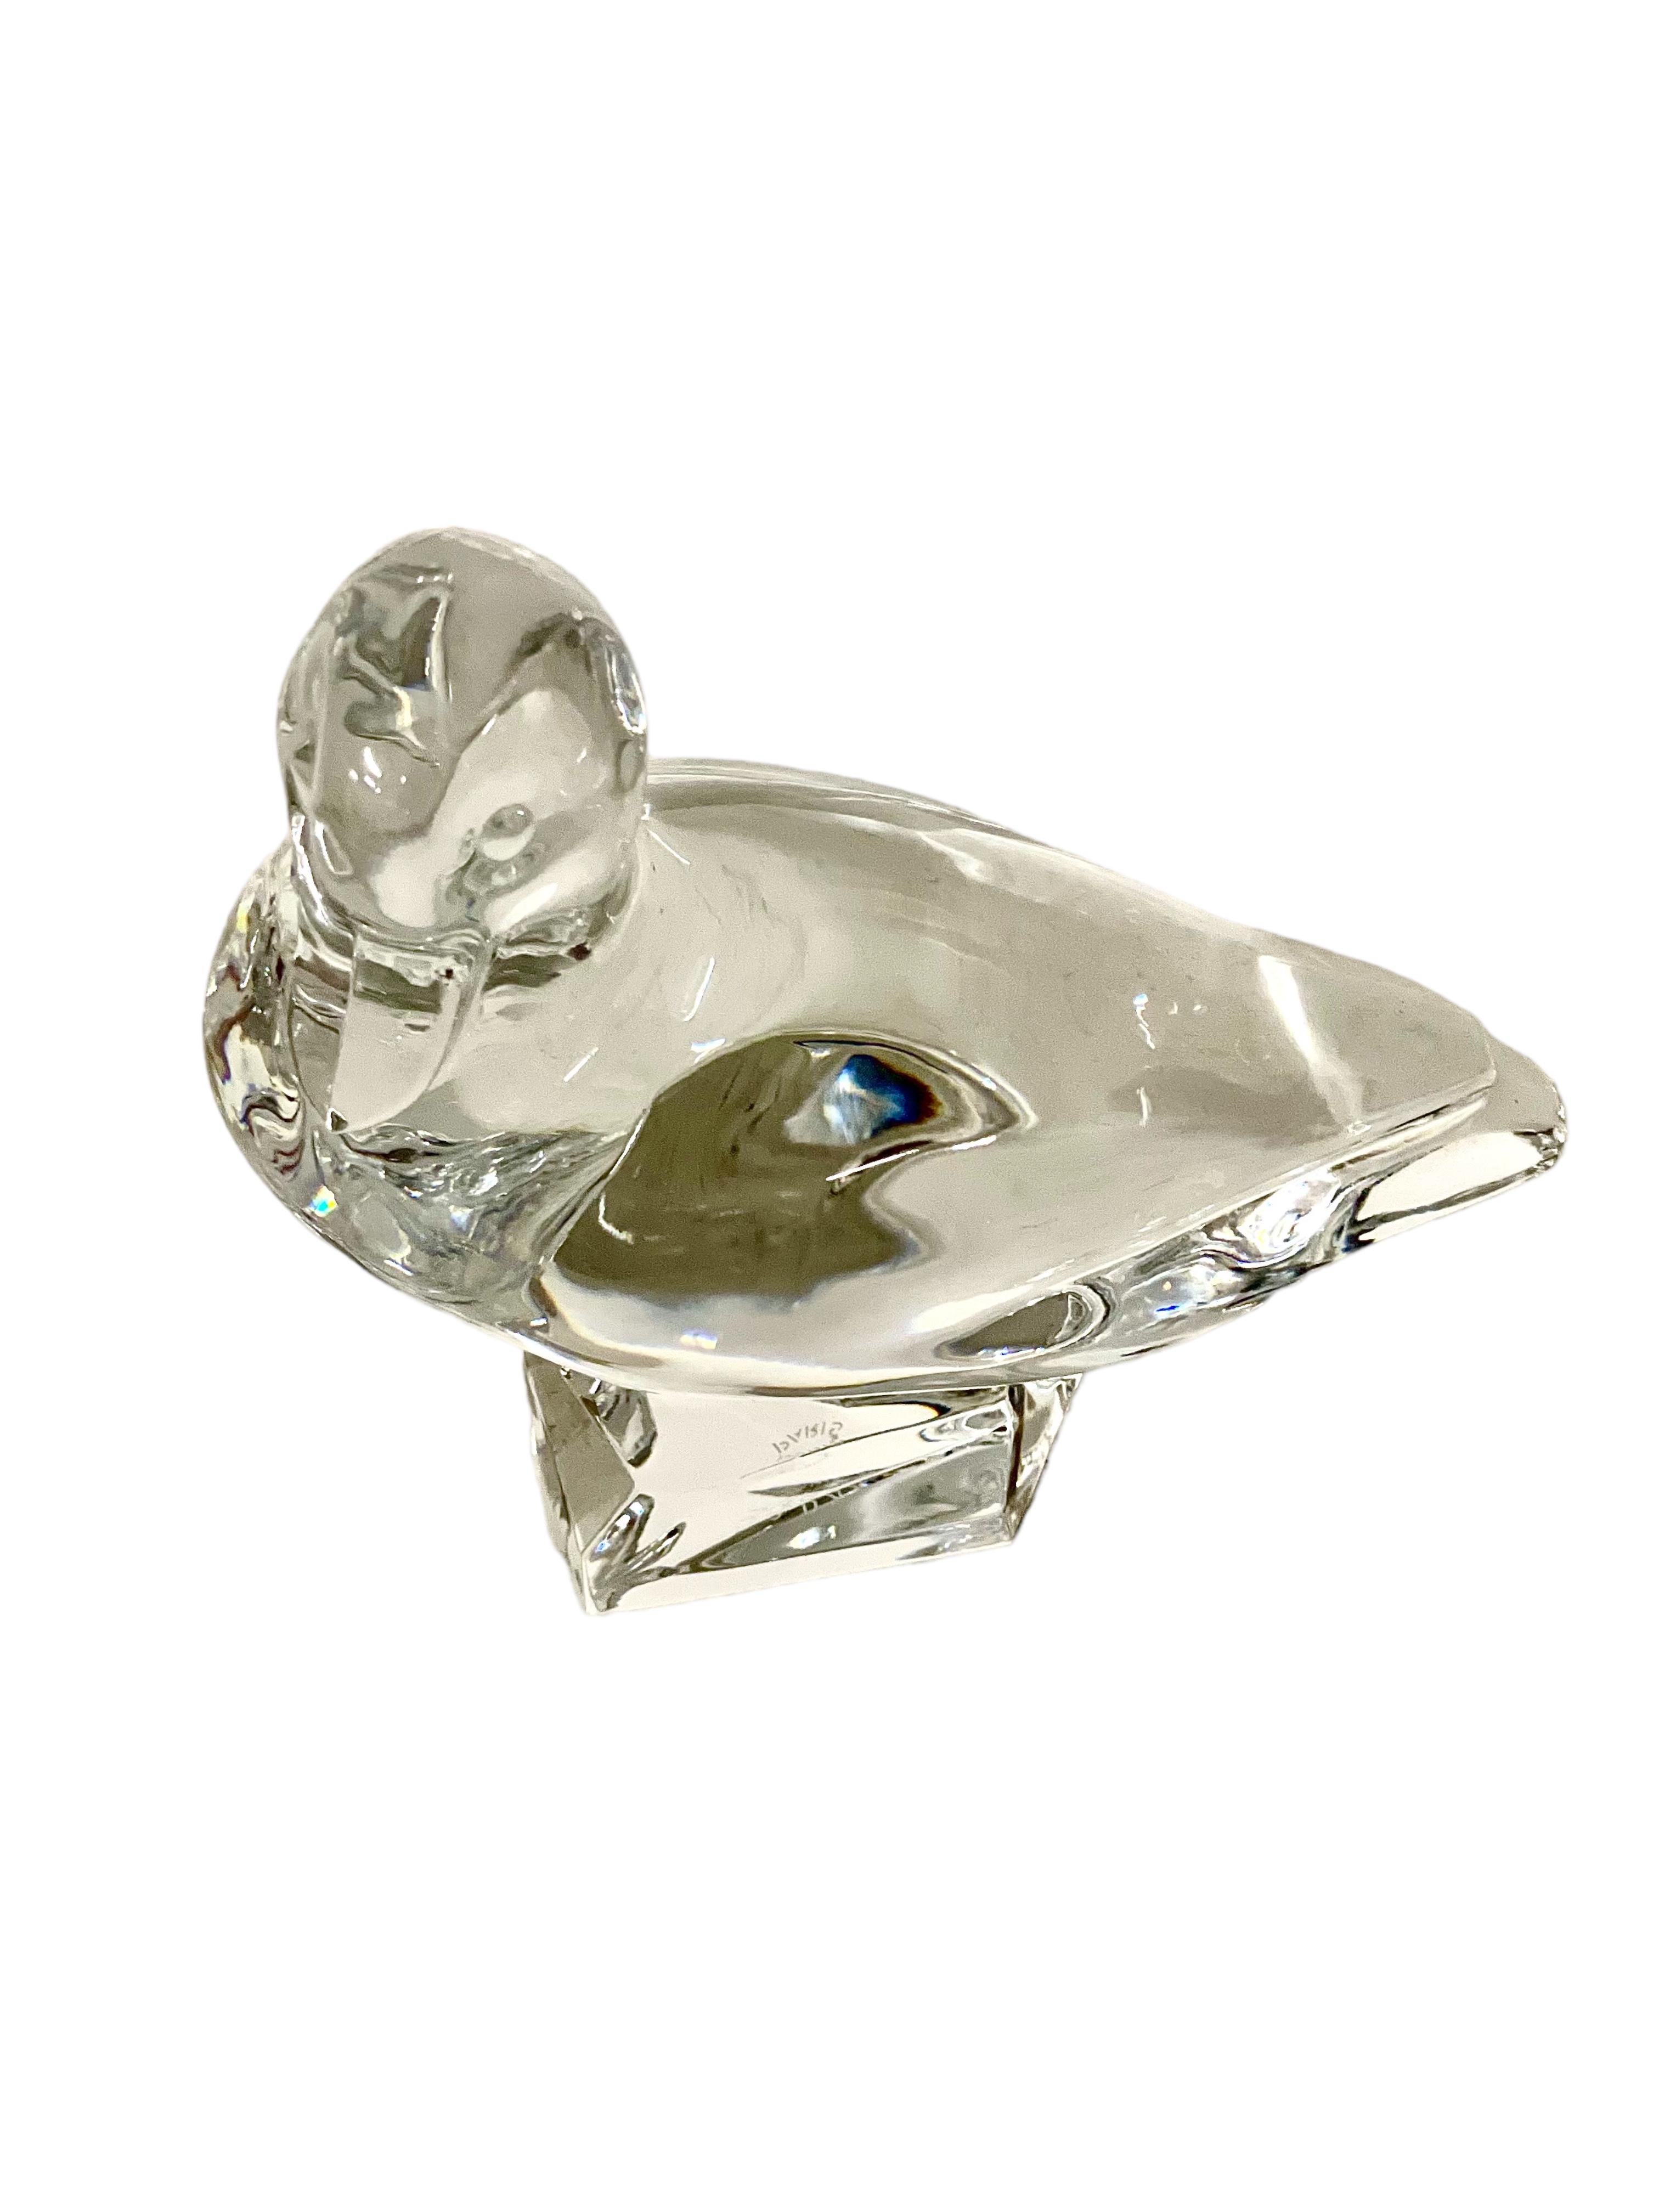 Art Deco Baccarat Crystal Duck Figurine Decoration or Paperweight For Sale